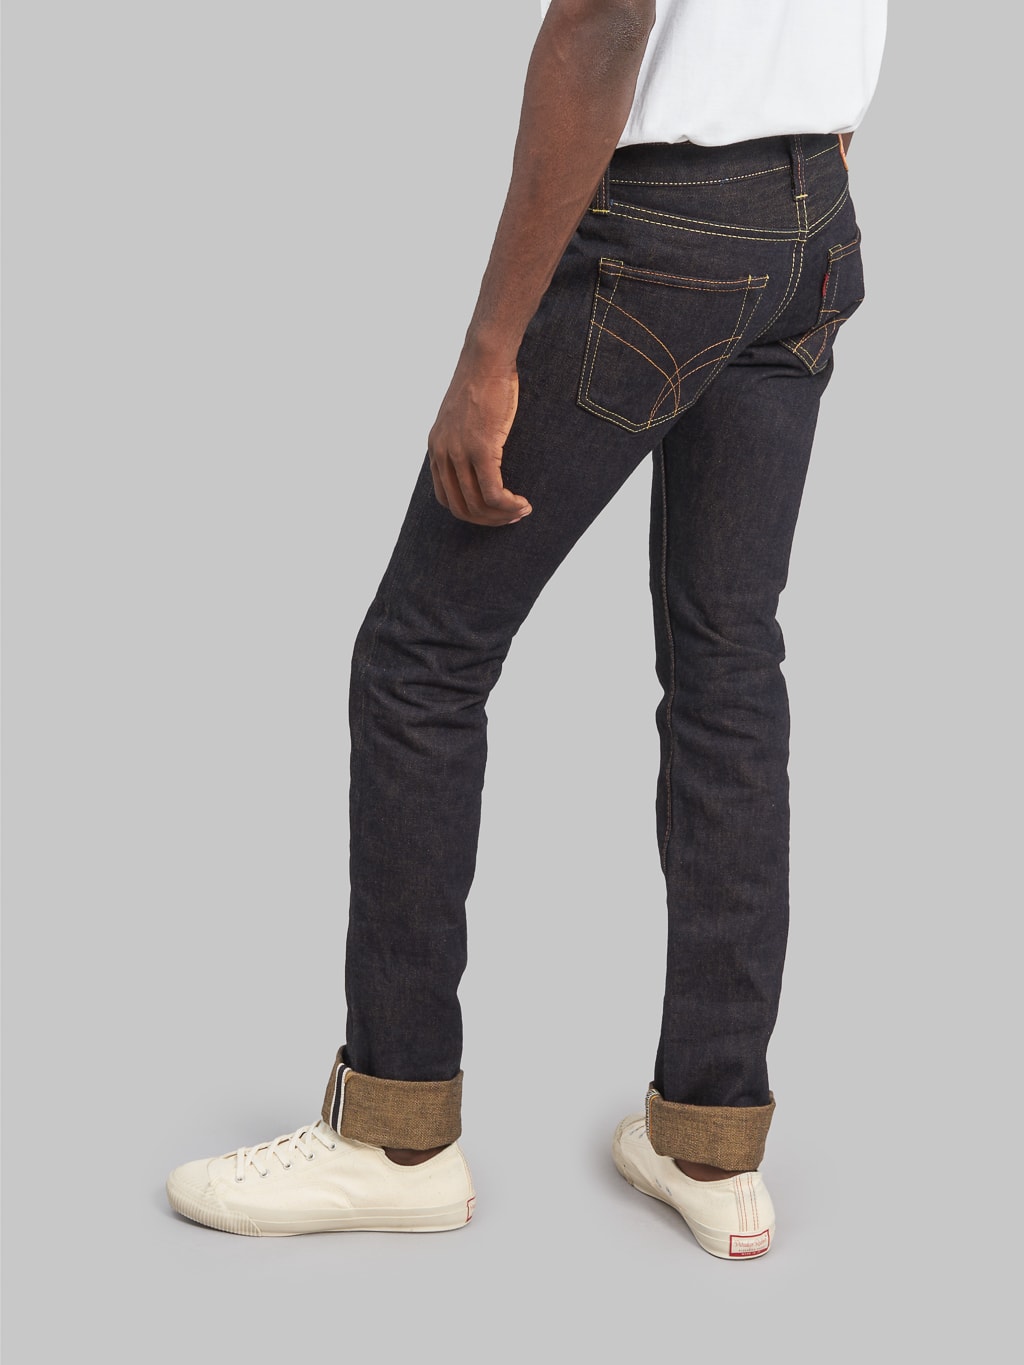 The Strike Gold Brown Weft Slim Tapered Jeans back fit